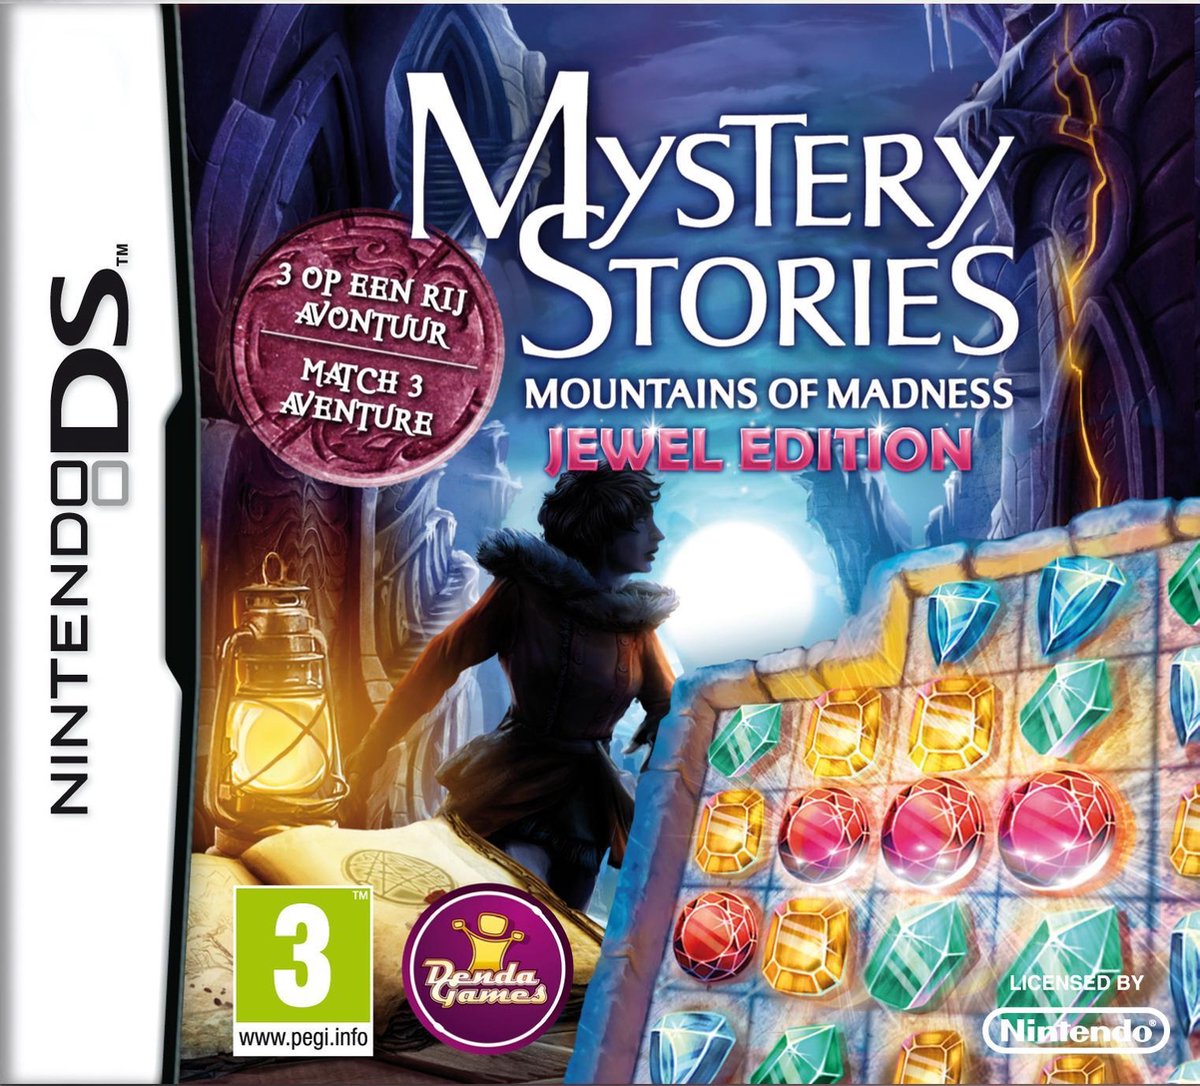 Denda Mystery Stories Mountains of Madness (Jewel Edition)